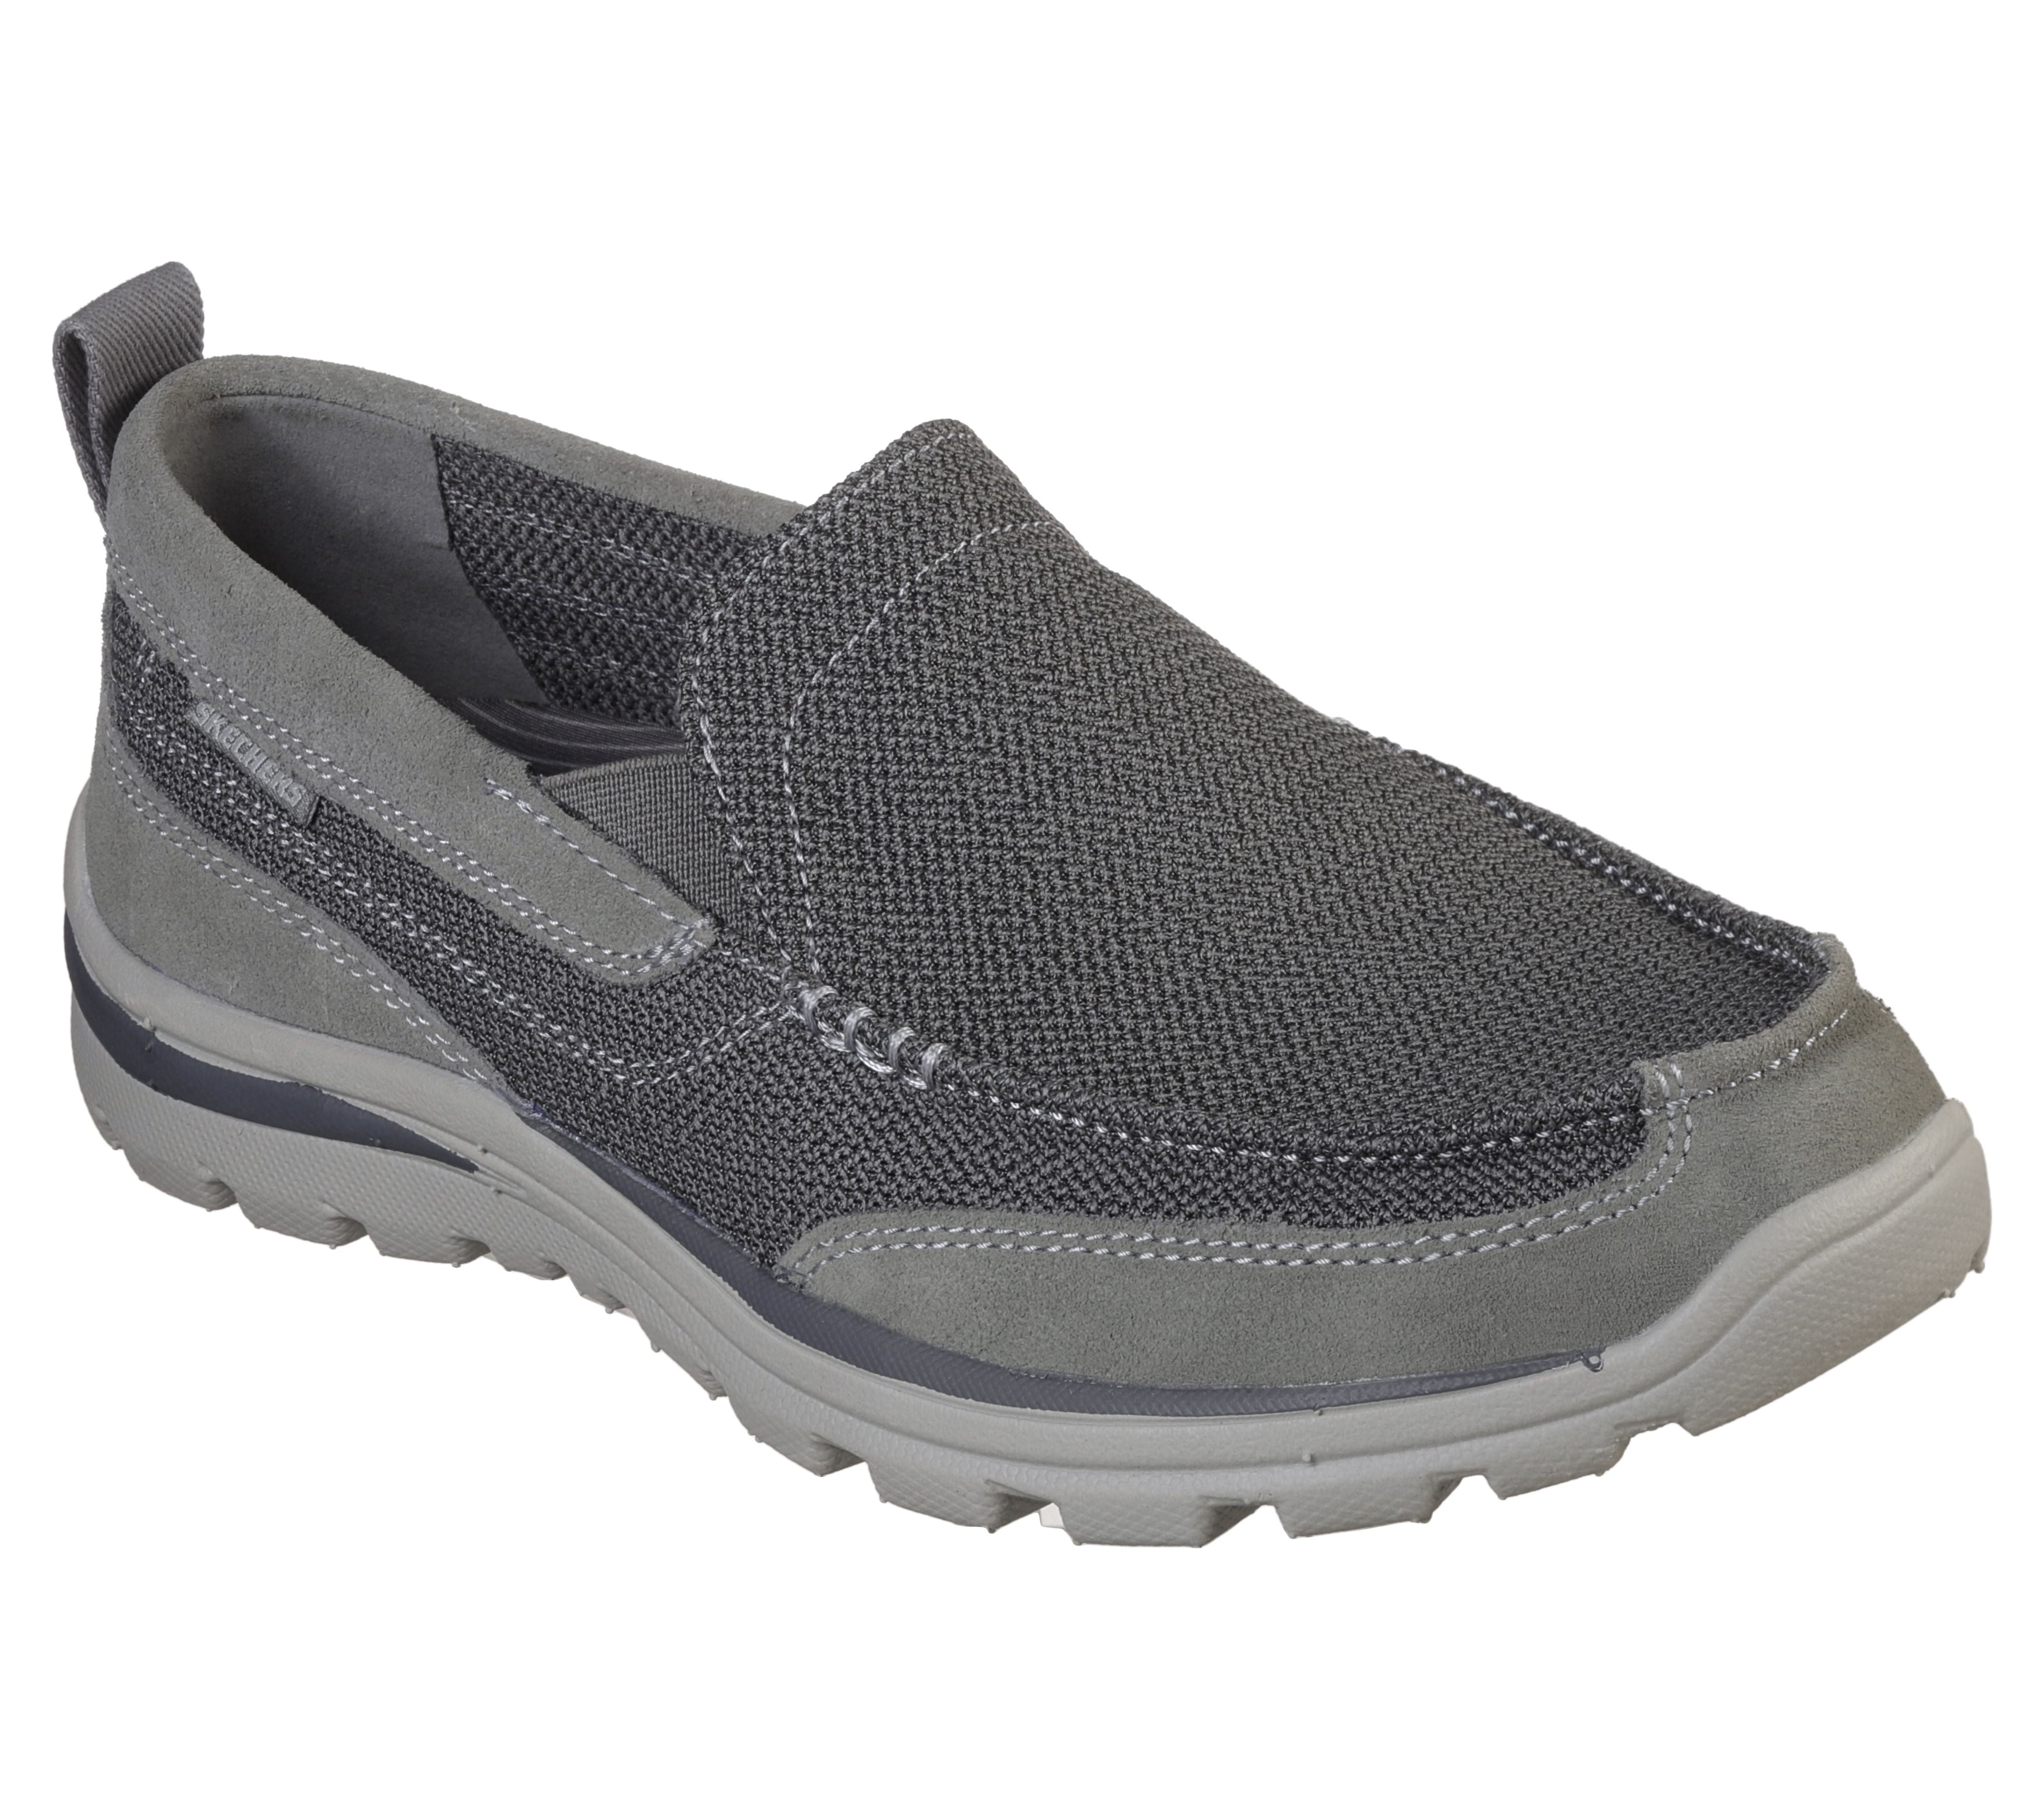 Skechers Men's Relaxed Fit Superior Milford Casual Slip-on (Wide Width Available) Walmart.com